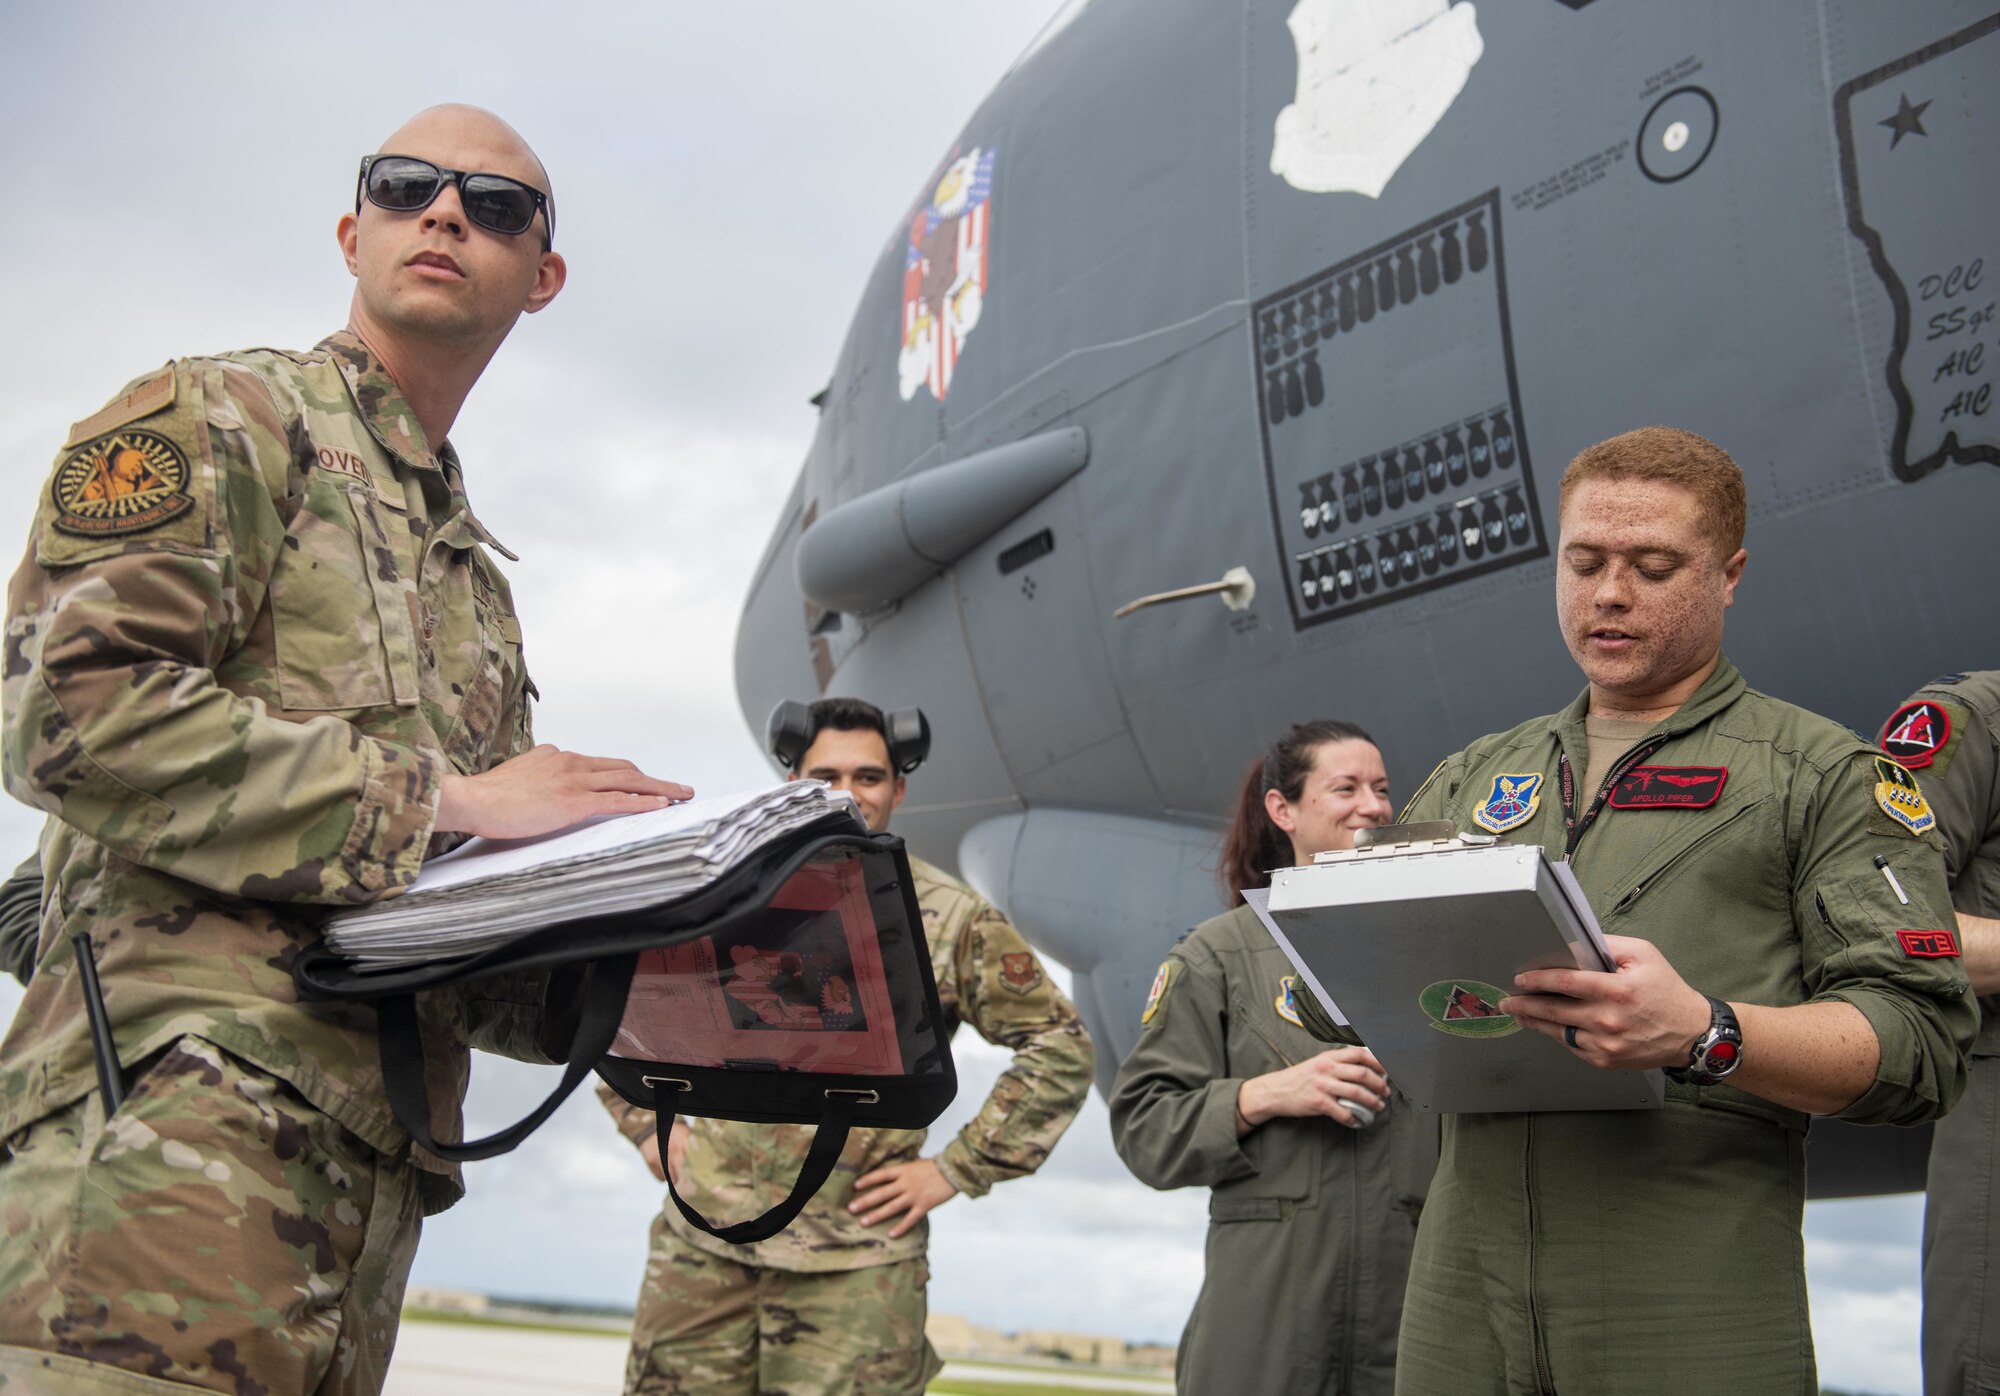 U.S. Air Force Tech Sgt. Alex Covert, 96th Expeditionary Bomb Squadron flight line expediter (left), and Capt. Kason Pifer, 96th EBS pilot (right), review post-flight forms during a Bomber Task Force mission at Andersen Air Force Base, Guam, Feb. 11, 2022. These bomber missions are representative of the U.S. commitment to our allies and enhancing regional security. (U.S. Air Force photo by Staff Sgt. Lawrence Sena)